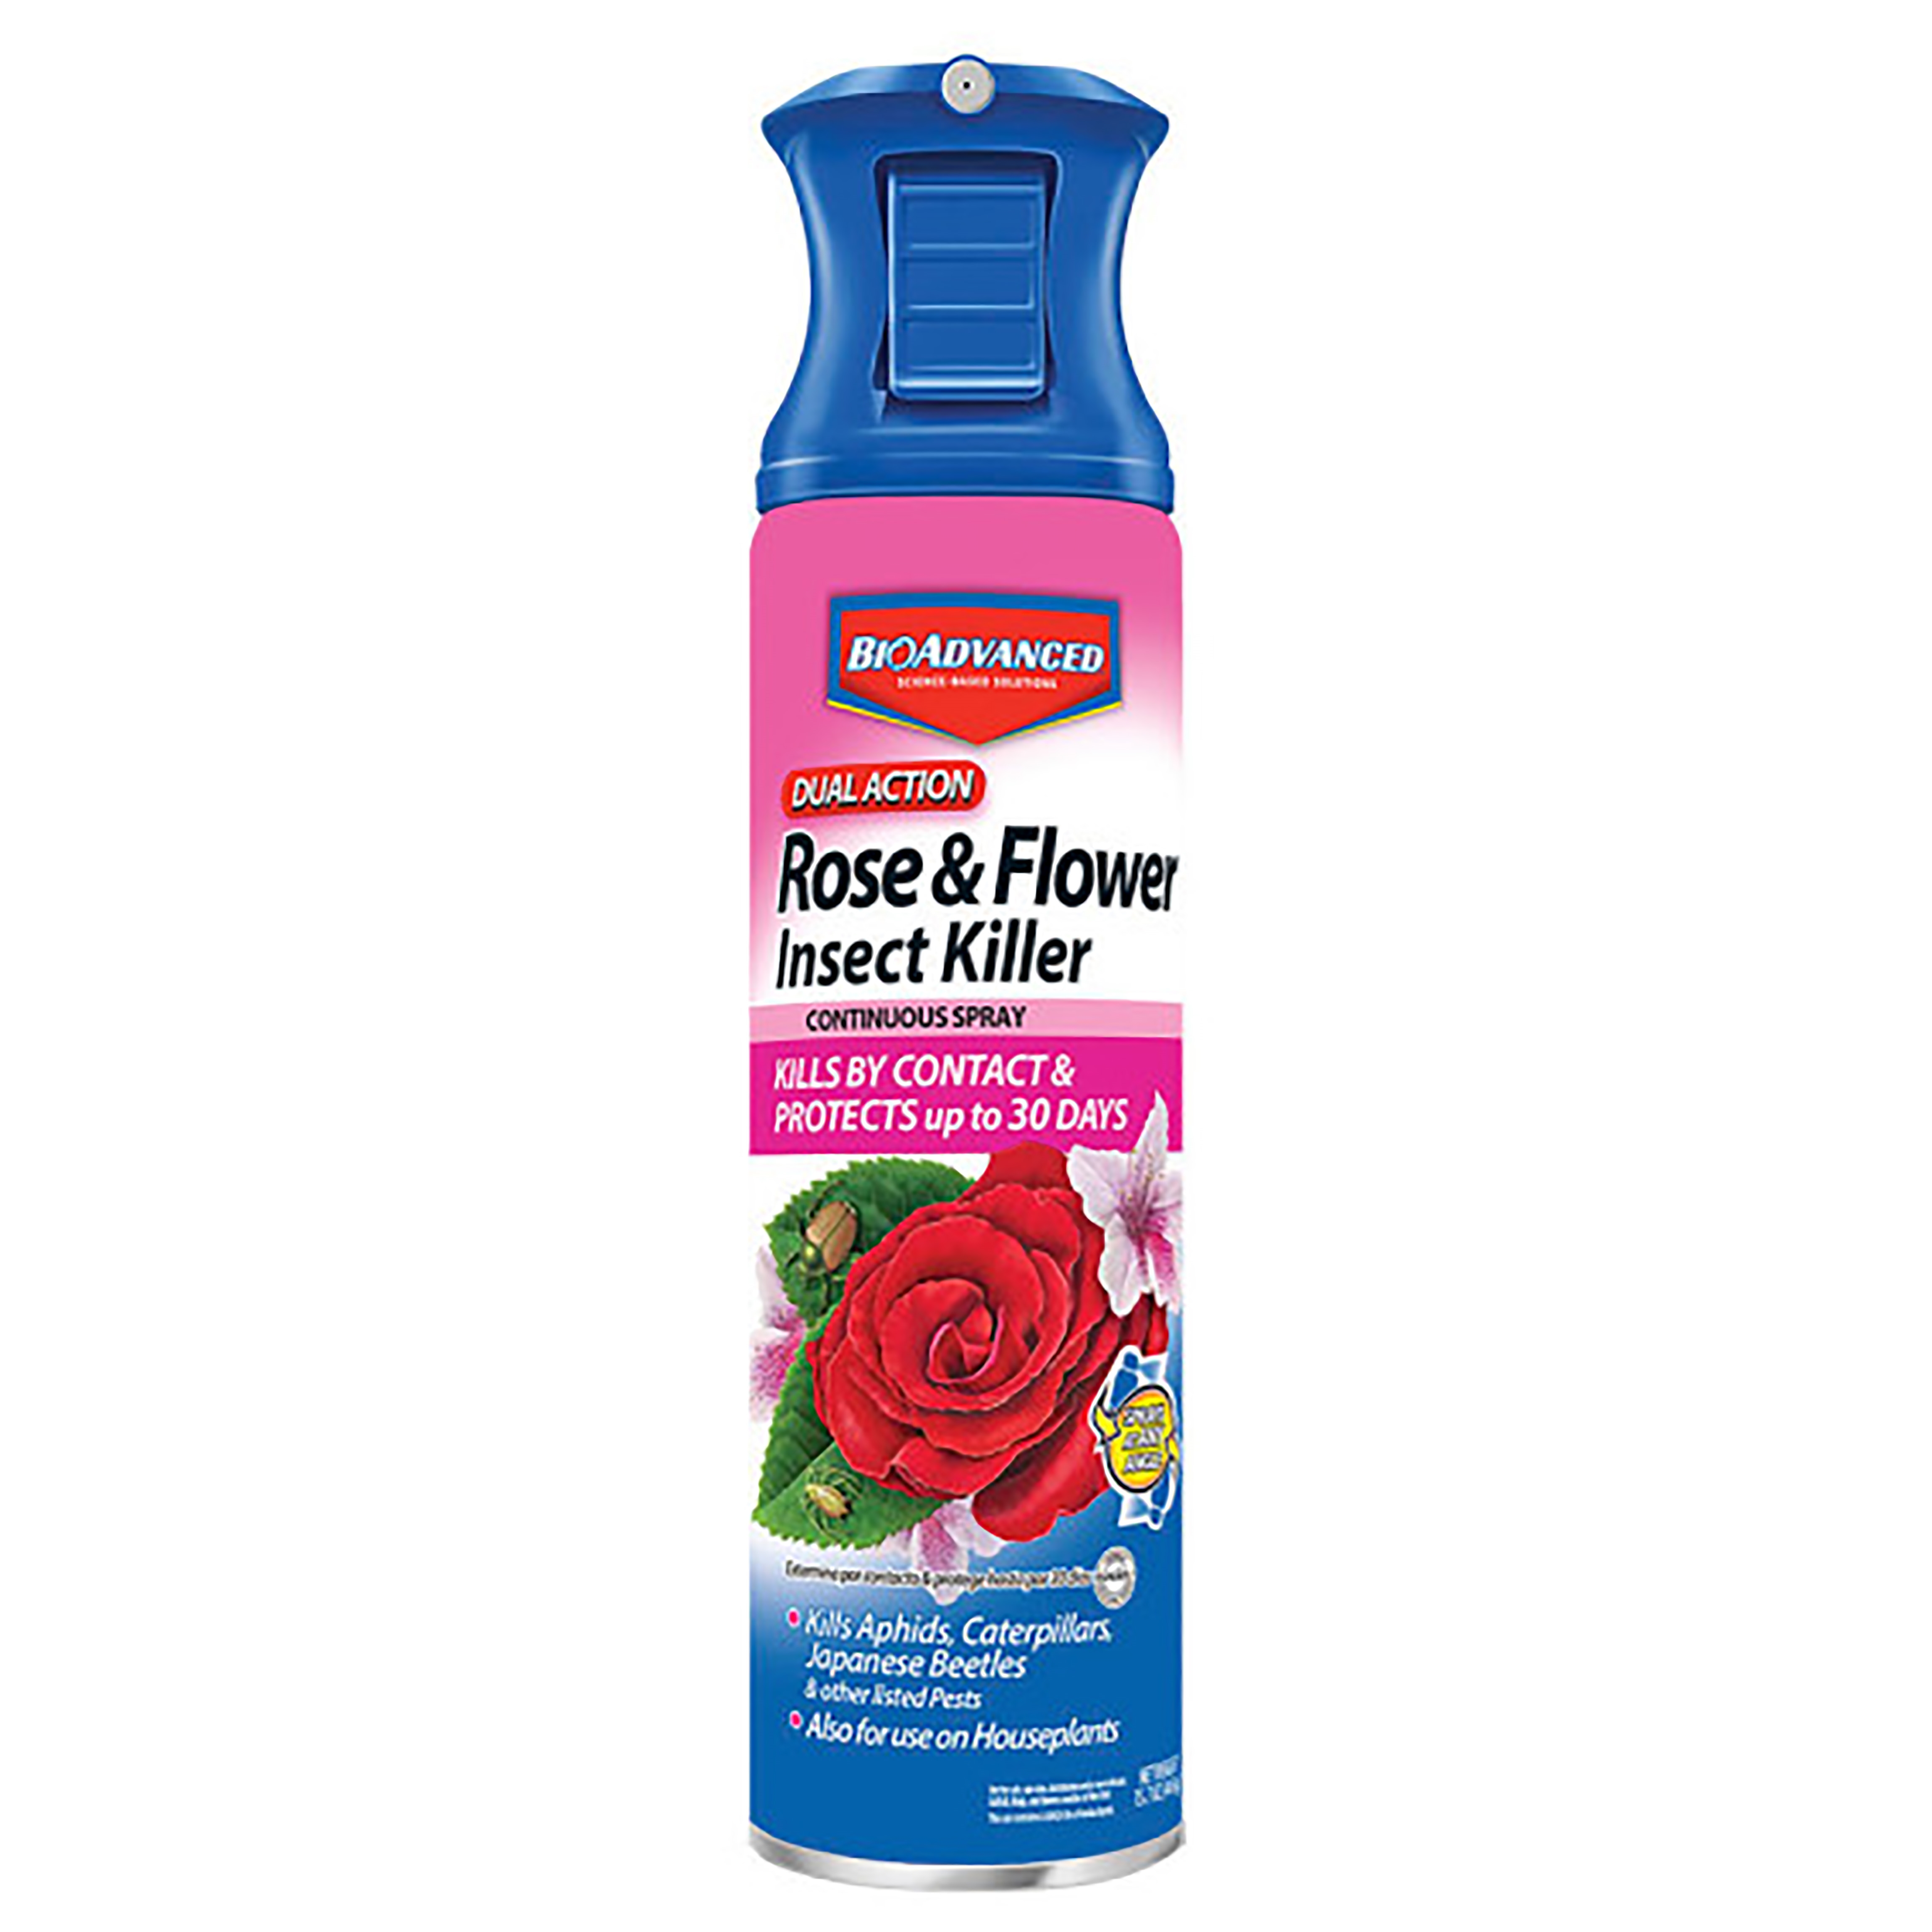 701330A Rose and Flower Insect Killer, Liquid, Spray Application, 15.7 oz Can